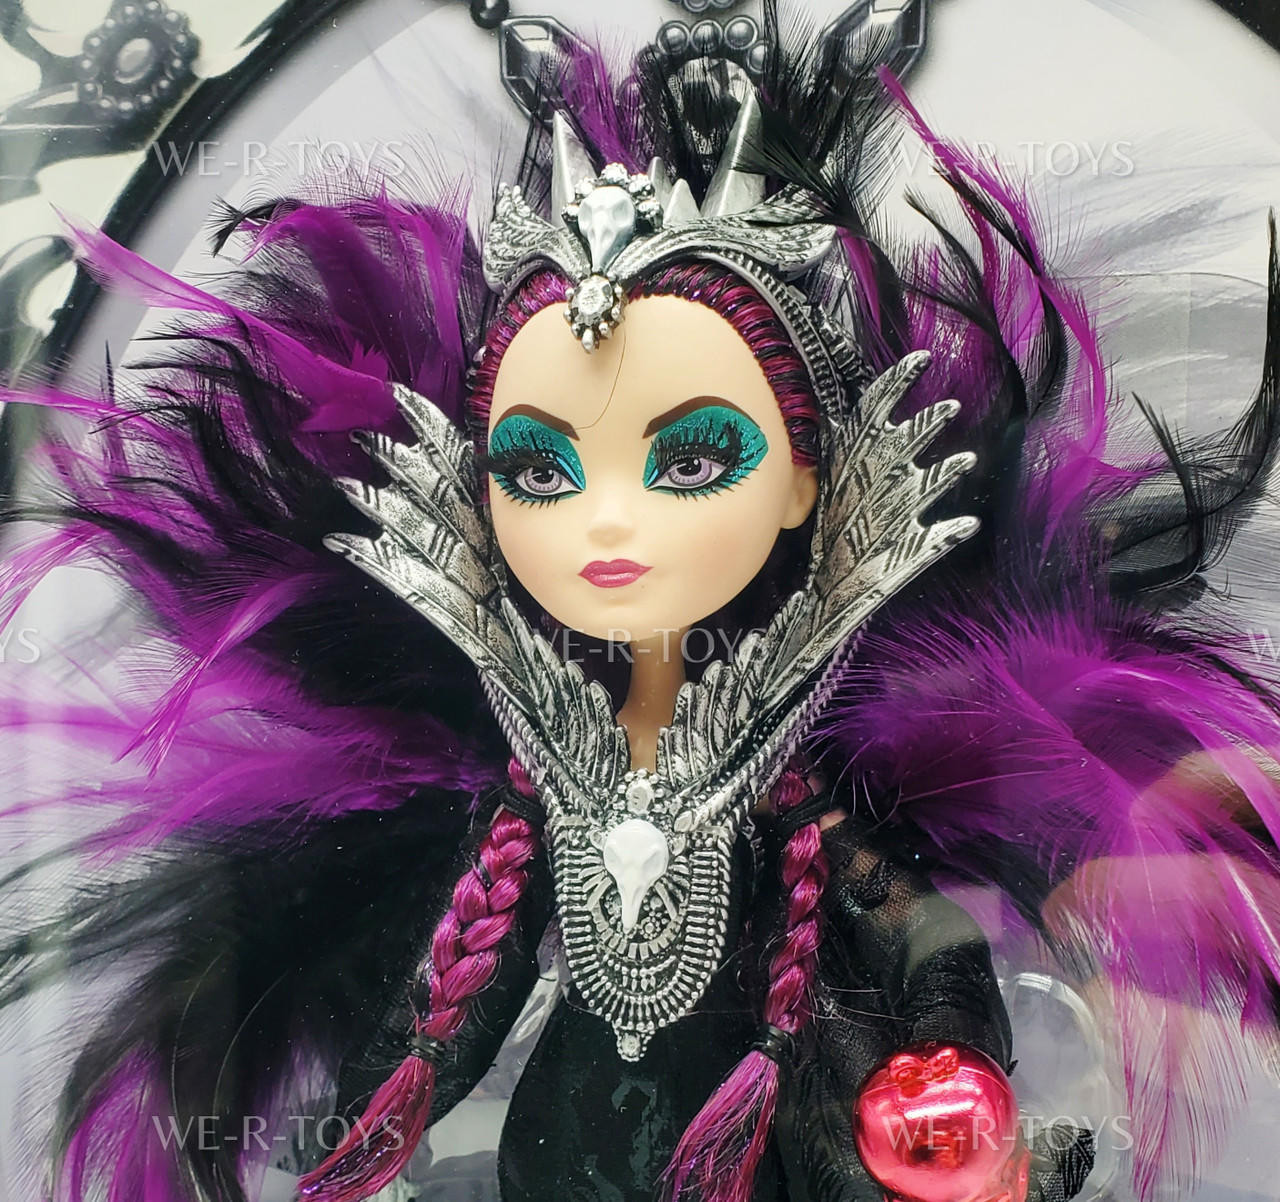 My toys,loves and fashions: Ever After High - Boneca da Raven Queen!!!